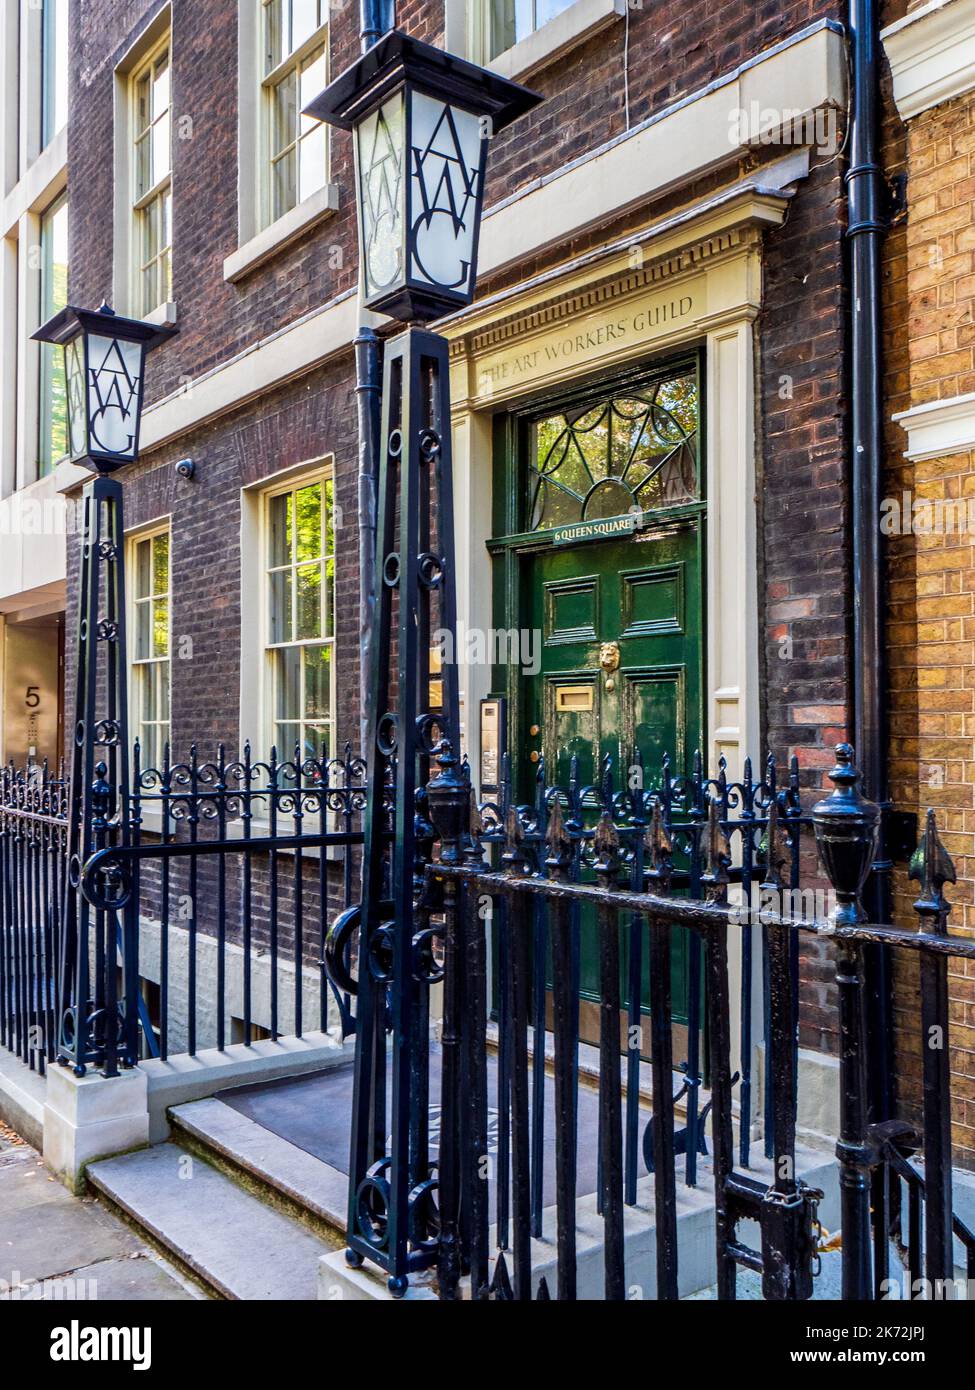 The Art Worker's Guild at 6 Queen Square, London. Established in 1884, it is a charitable organisation formed to support the visual arts and crafts. Stock Photo